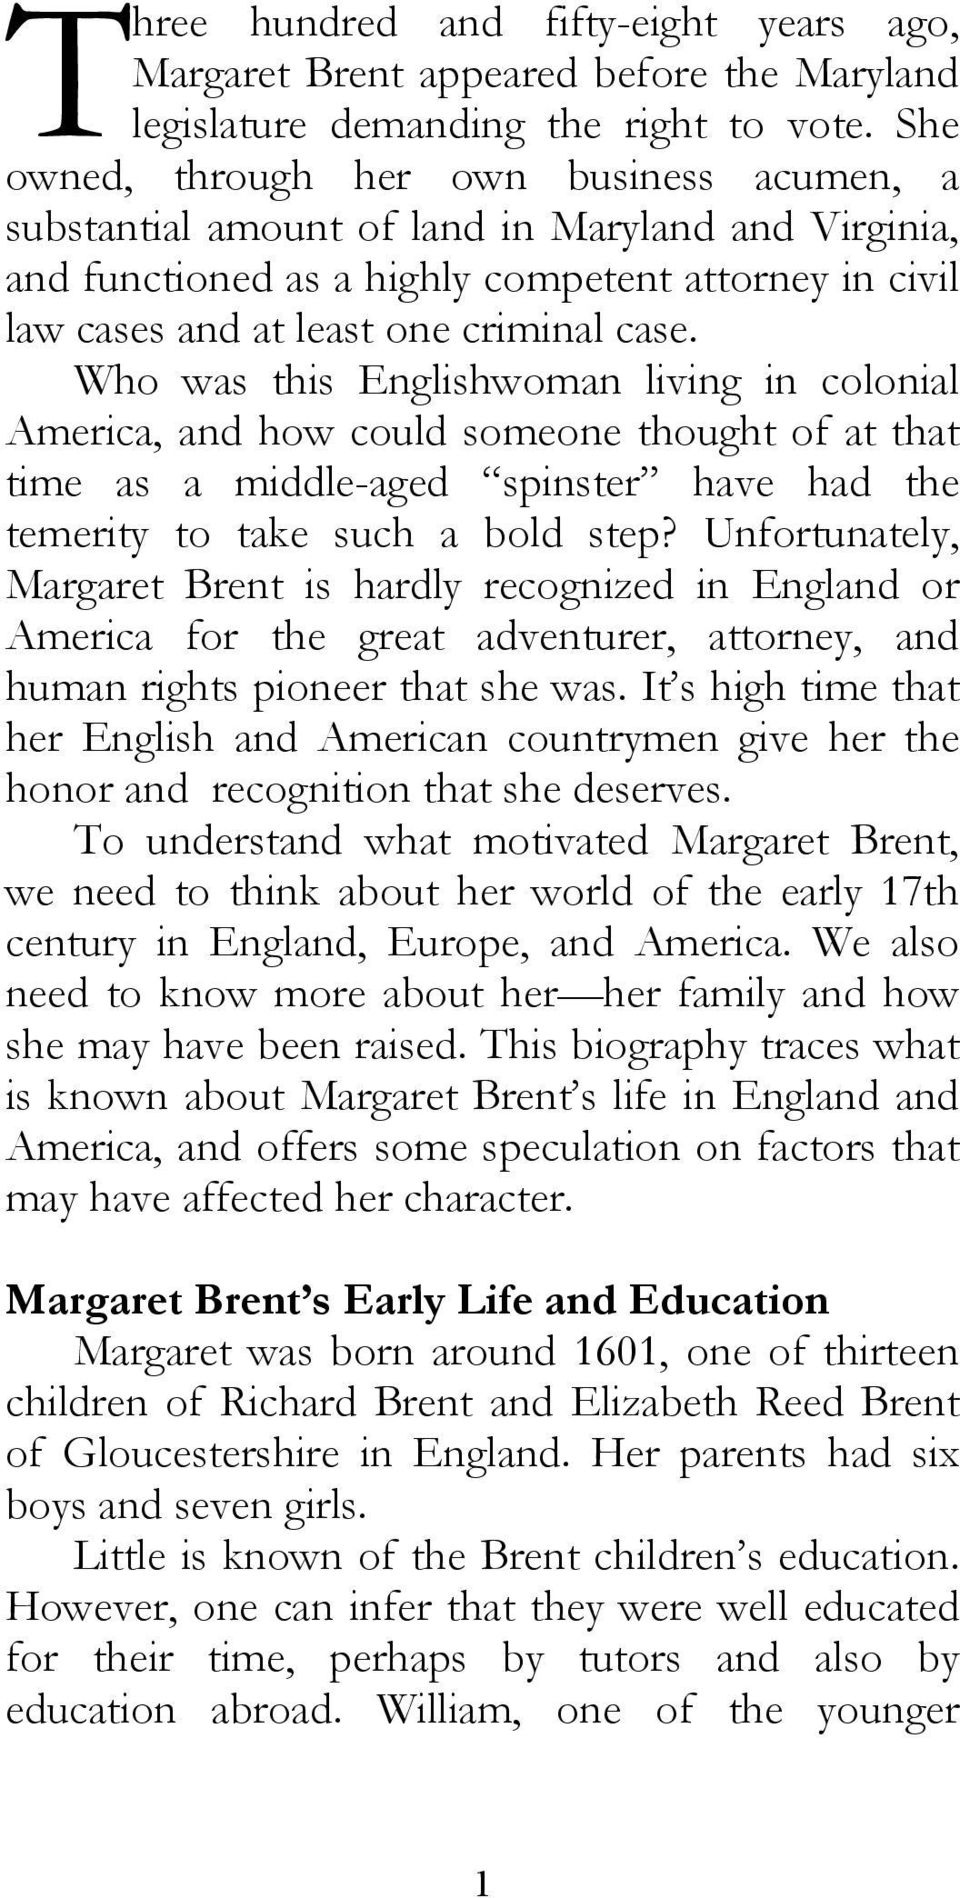 Who was this Englishwoman living in colonial America, and how could someone thought of at that time as a middle-aged spinster have had the temerity to take such a bold step?